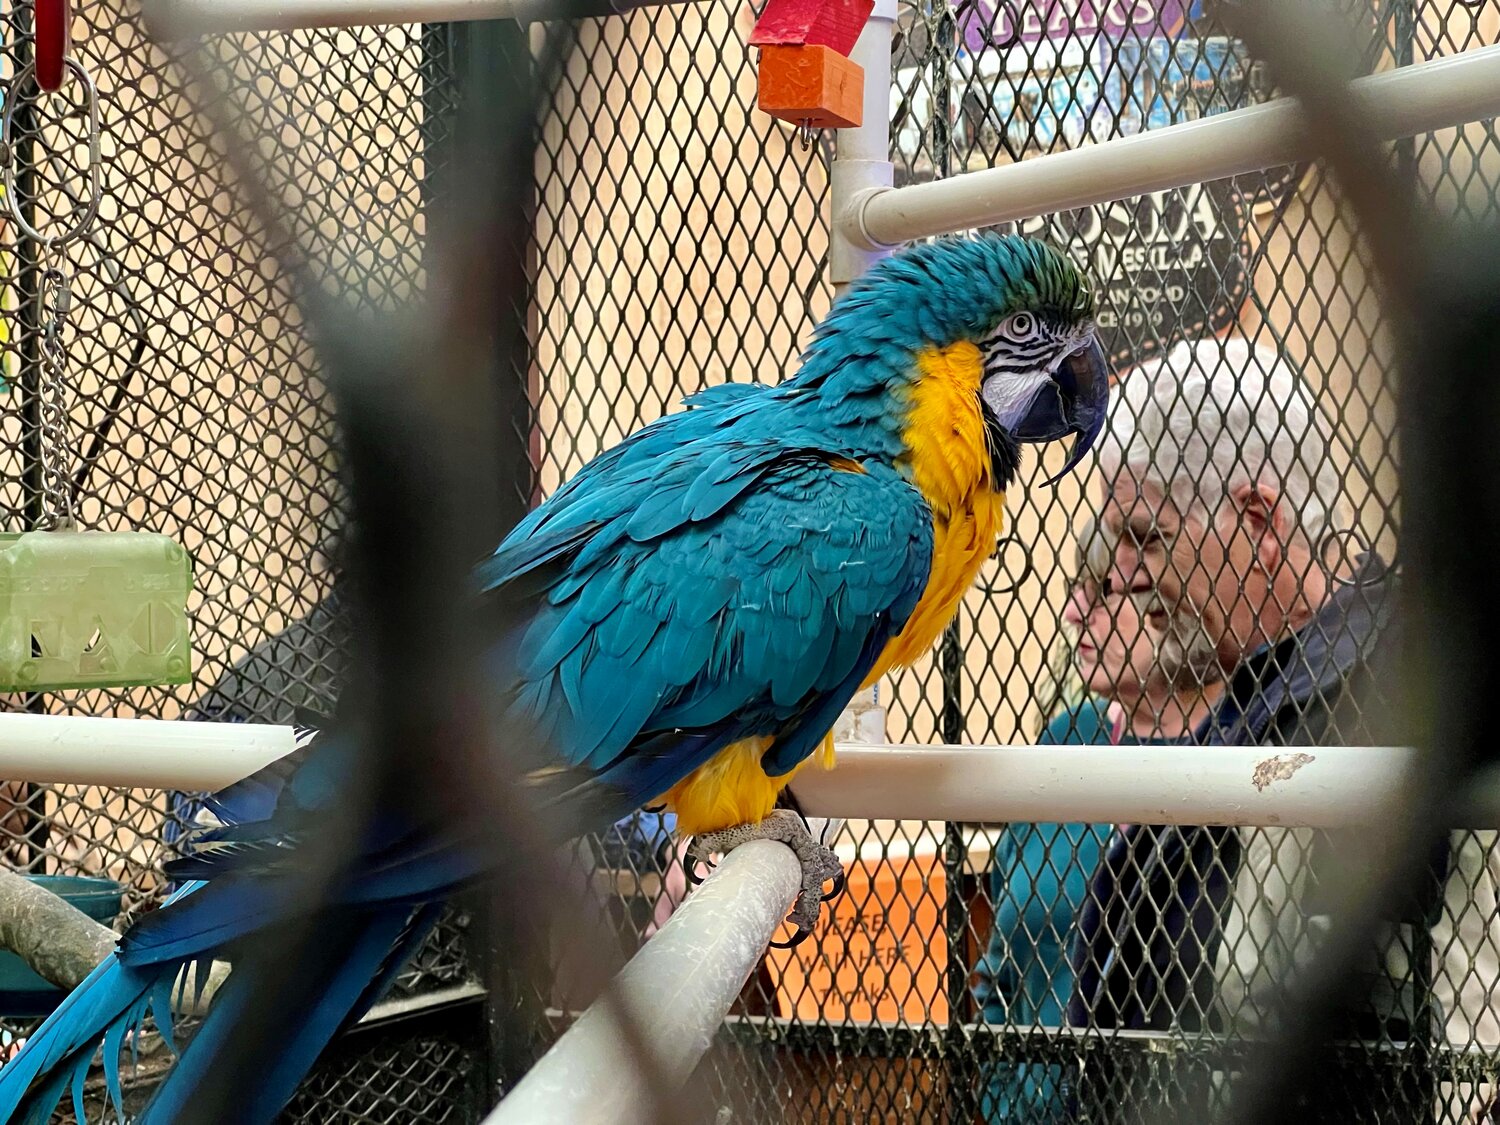 DaVinci, a blue and yellow macaw, looks on as customers wait to be seated at La Posta de Mesilla on Jan. 16.